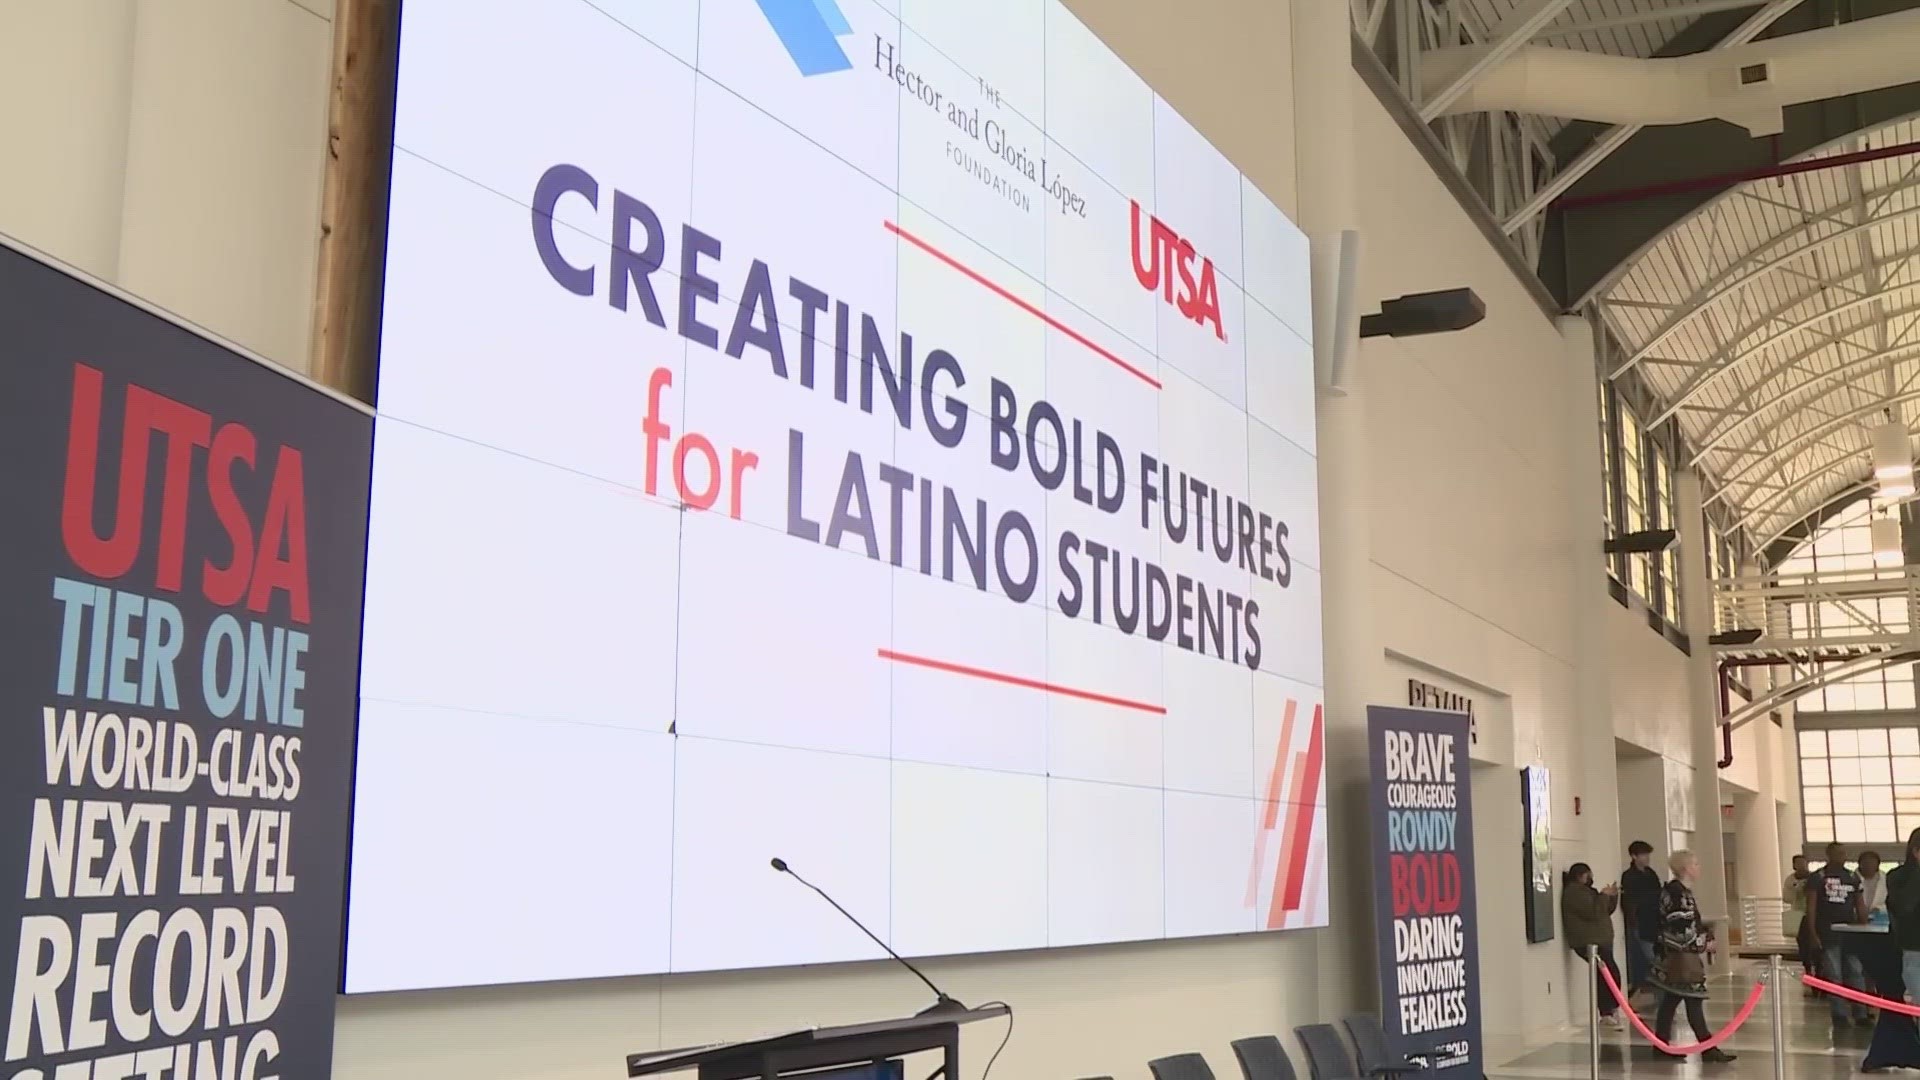 The university announced a gift that would make possible full-ride scholarships for 15 Latino, first-generation college students.